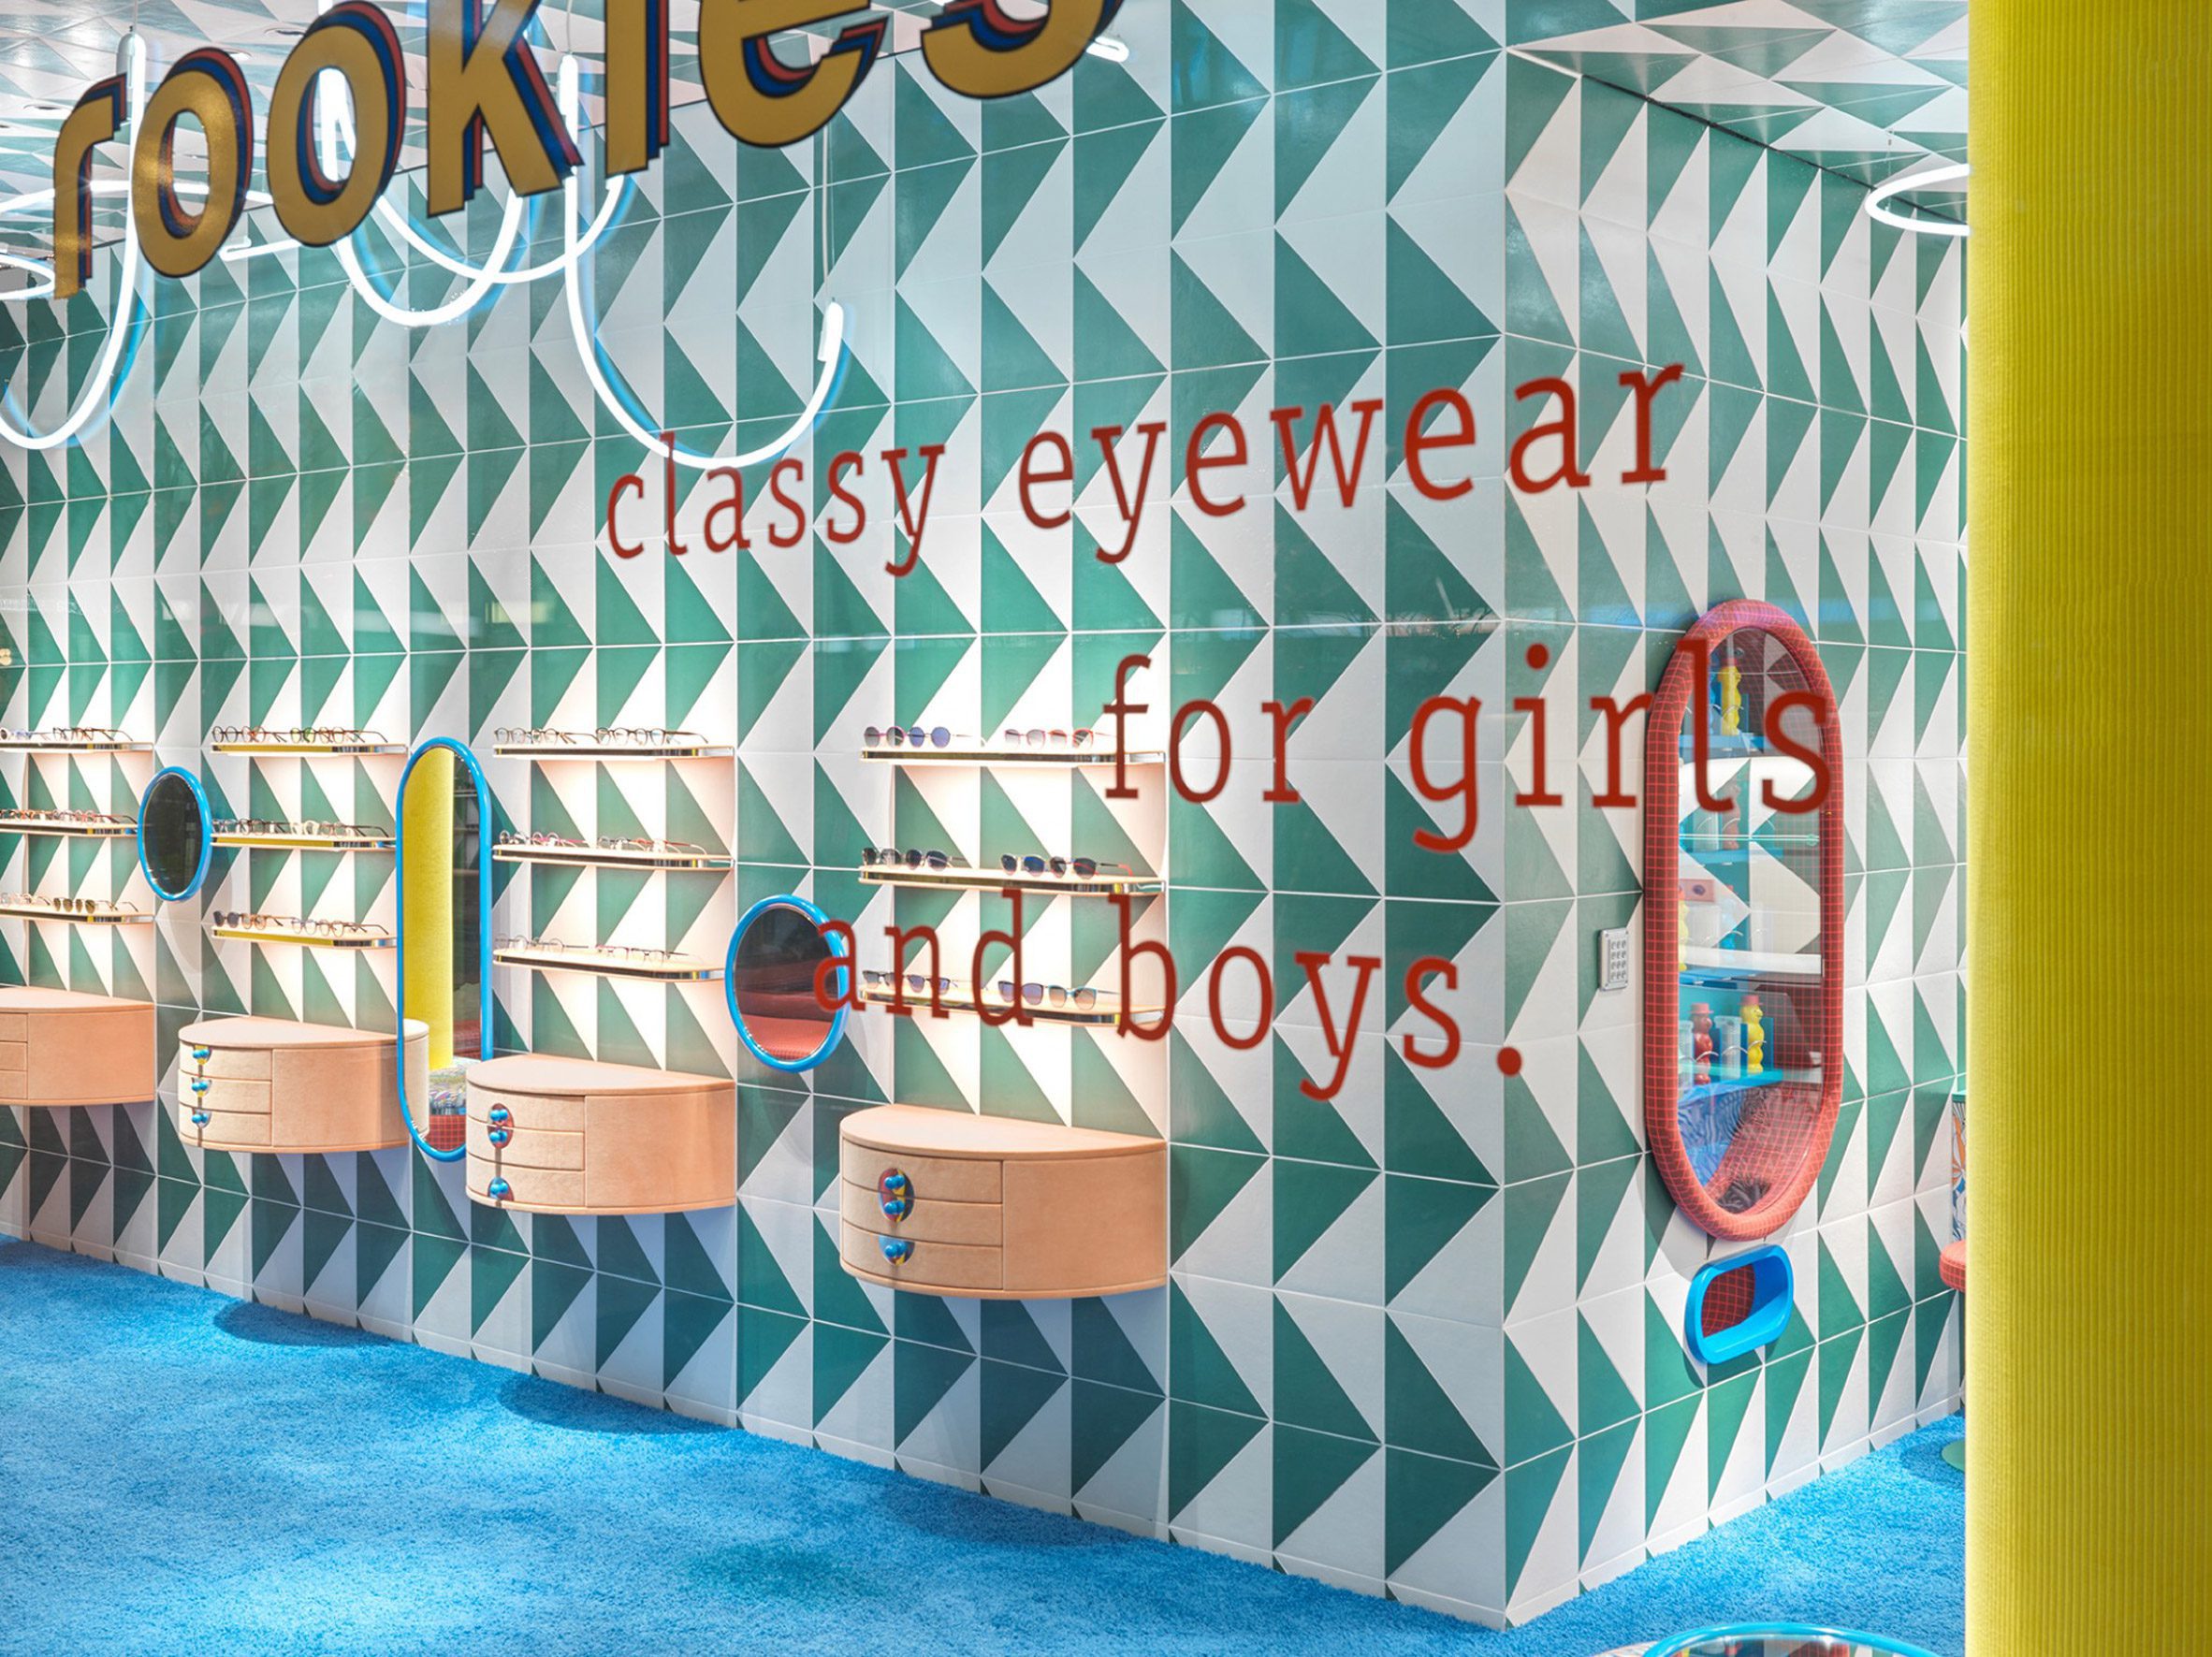 Brightly coloured tiles and carpet cover the walls and floor of the Leidmann eyewear store